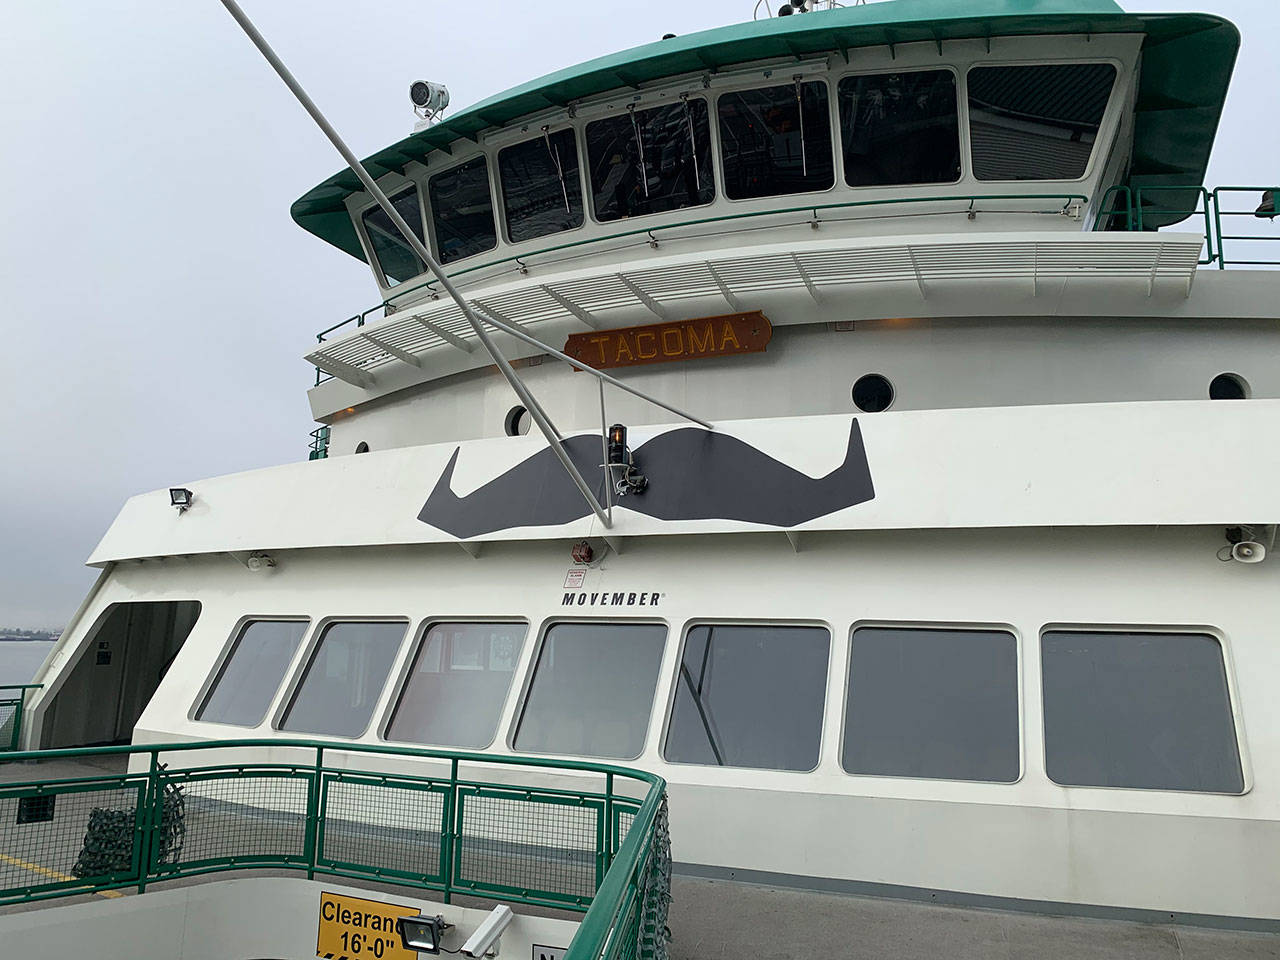 The ferry M/V Tacoma sports its new look for ‘Movember.’ (Photo courtesy of Washington State Ferries)